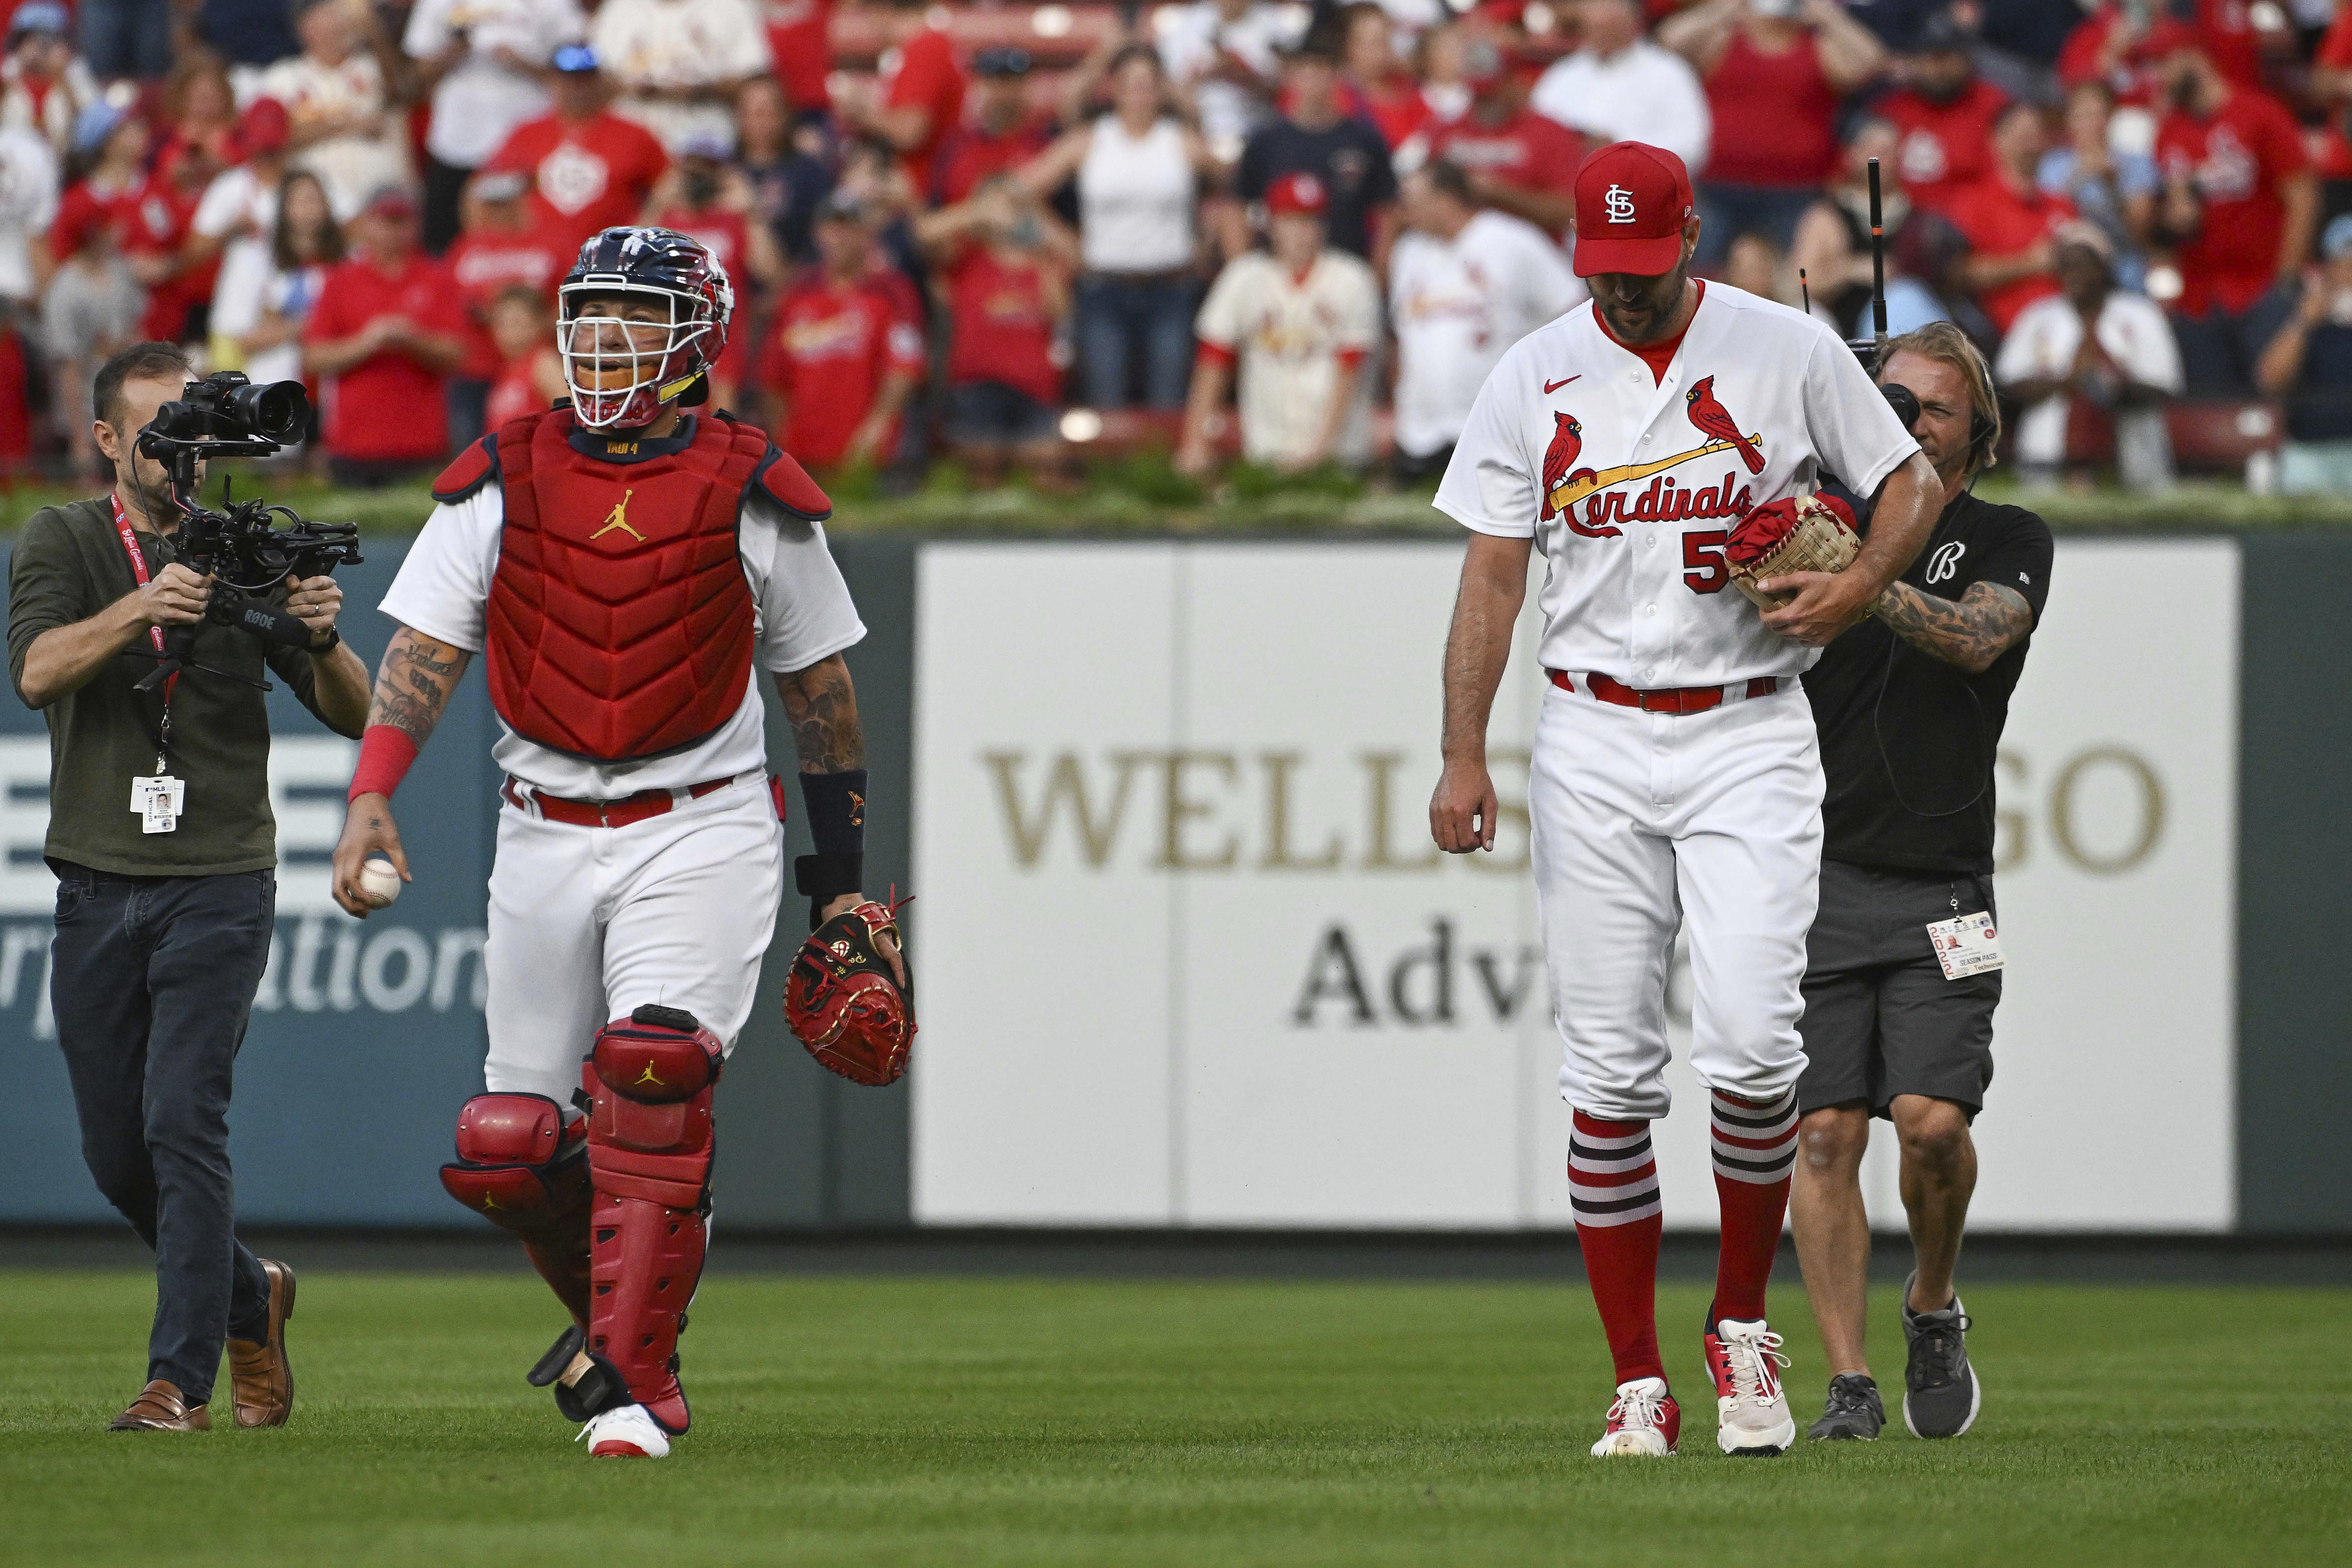 St. Louis Cardinals' Yadier Molina, left, and Adam Wainwright walk in from the bullpen after warming up for the team's baseball game against the Milwaukee Brewers on Wednesday Sept. 14, 2022, in St. Louis. (AP Photo/Joe Puetz)